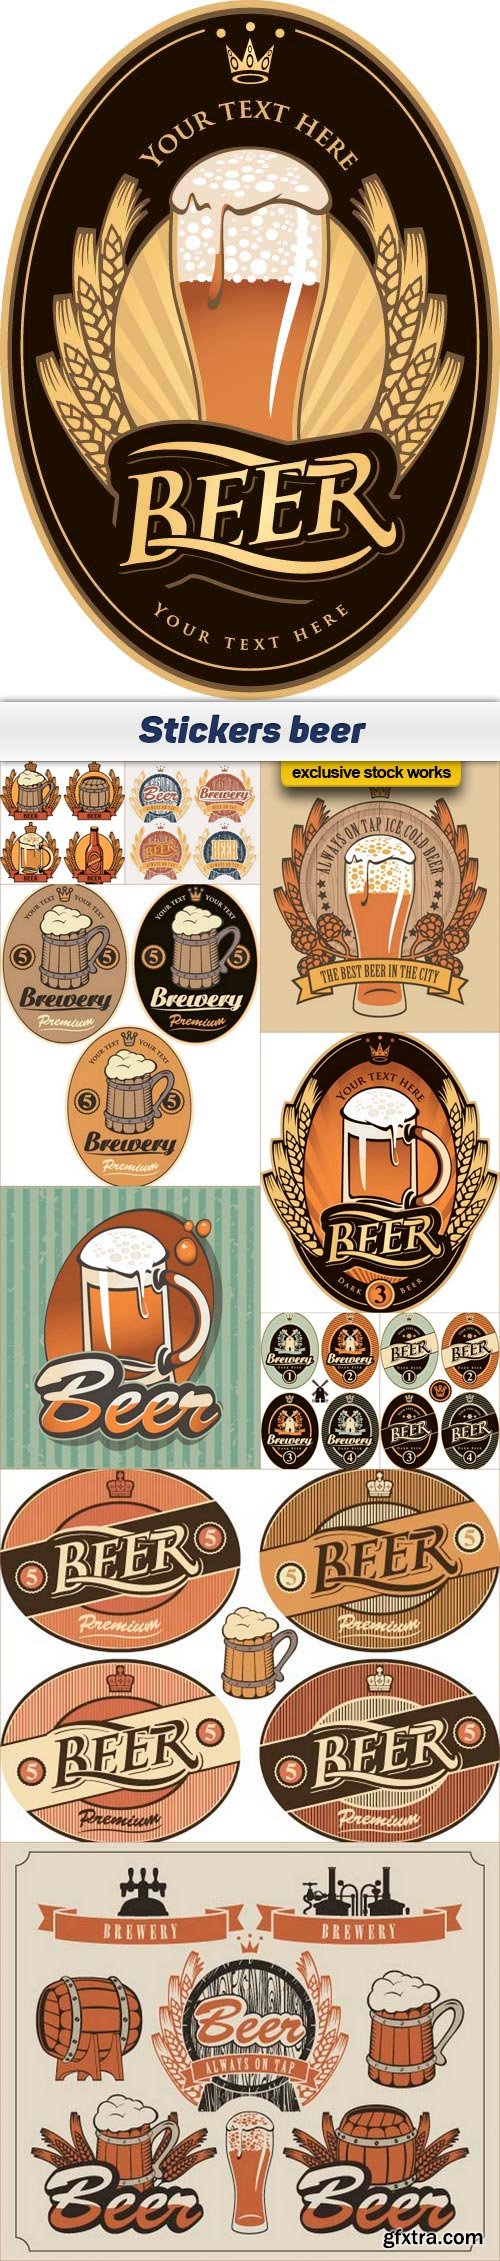 Stickers beer 11x EPS